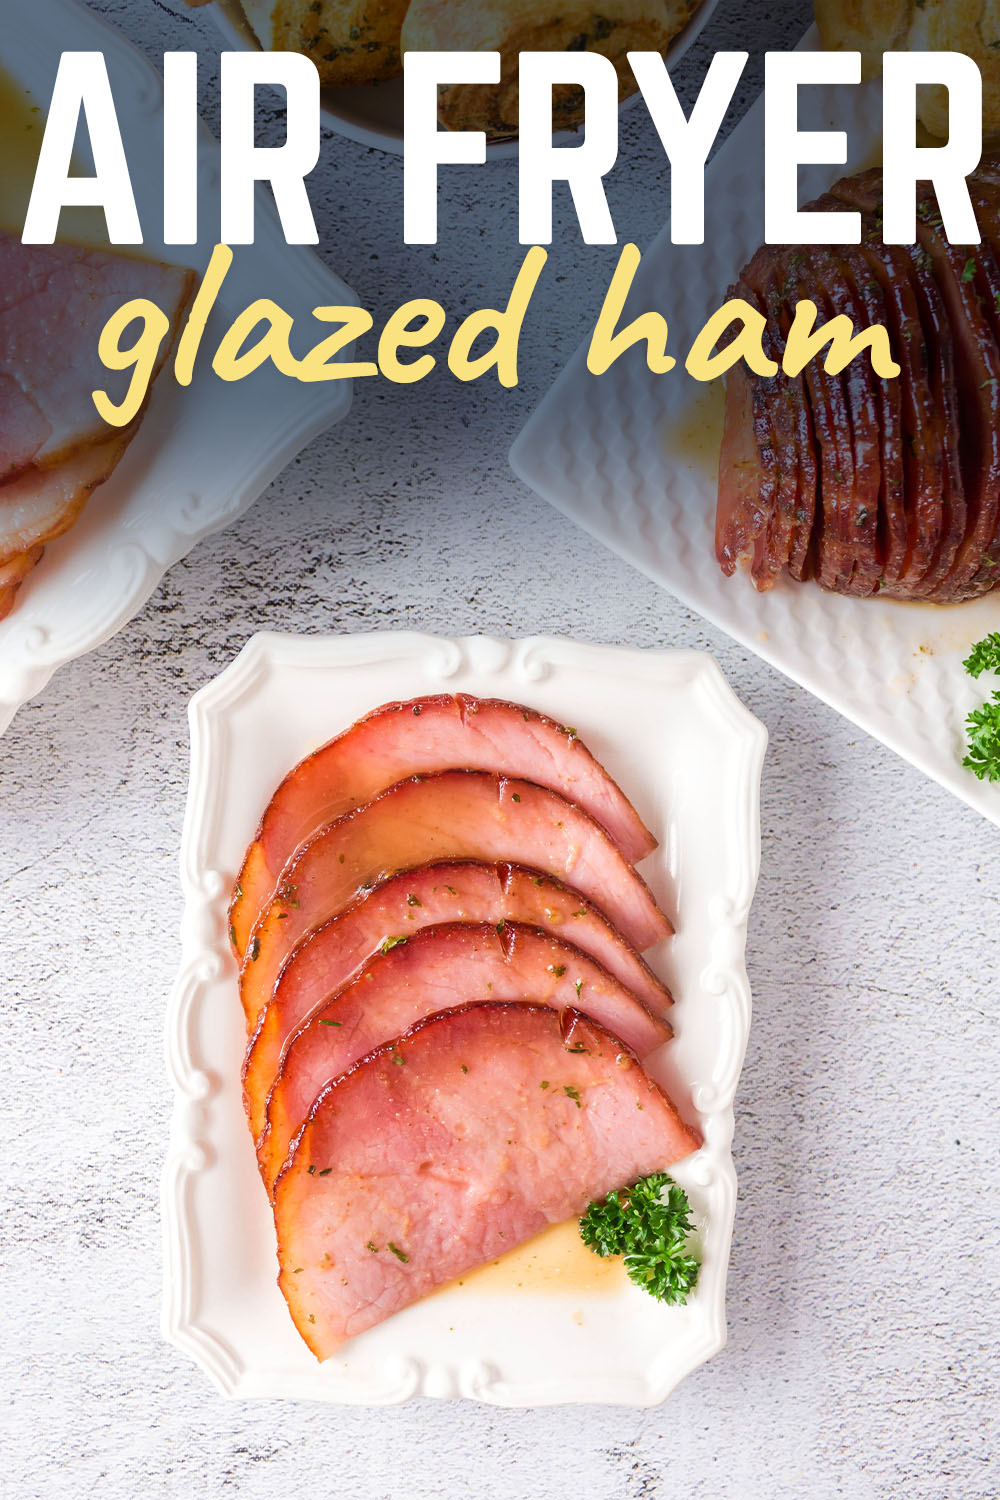 Overhead view of sliced ham on serving trays.